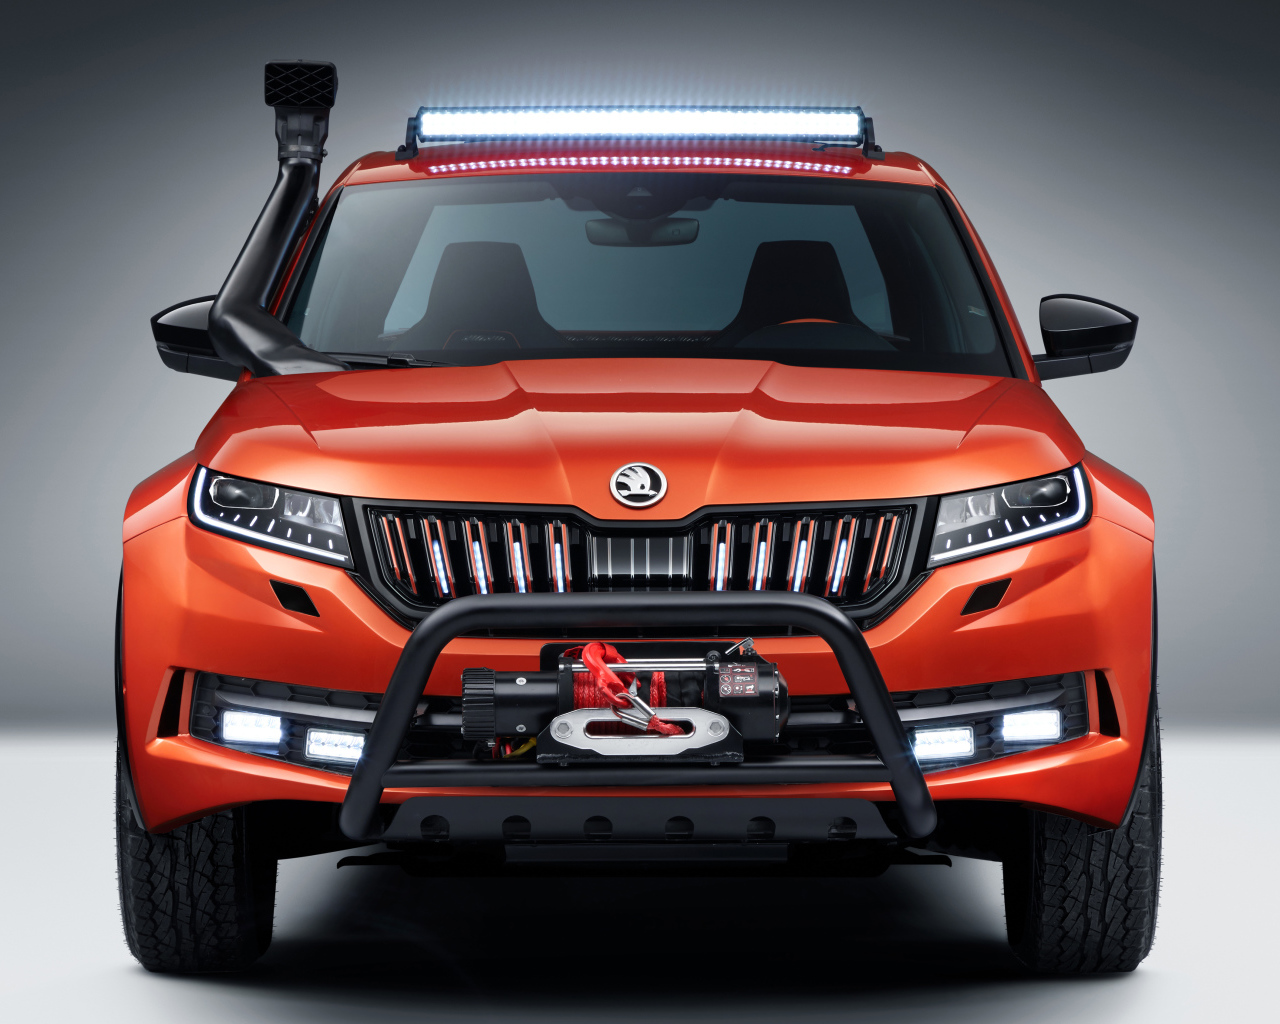 Red 2019 SUV Skoda Mountiaq Concept on a gray background